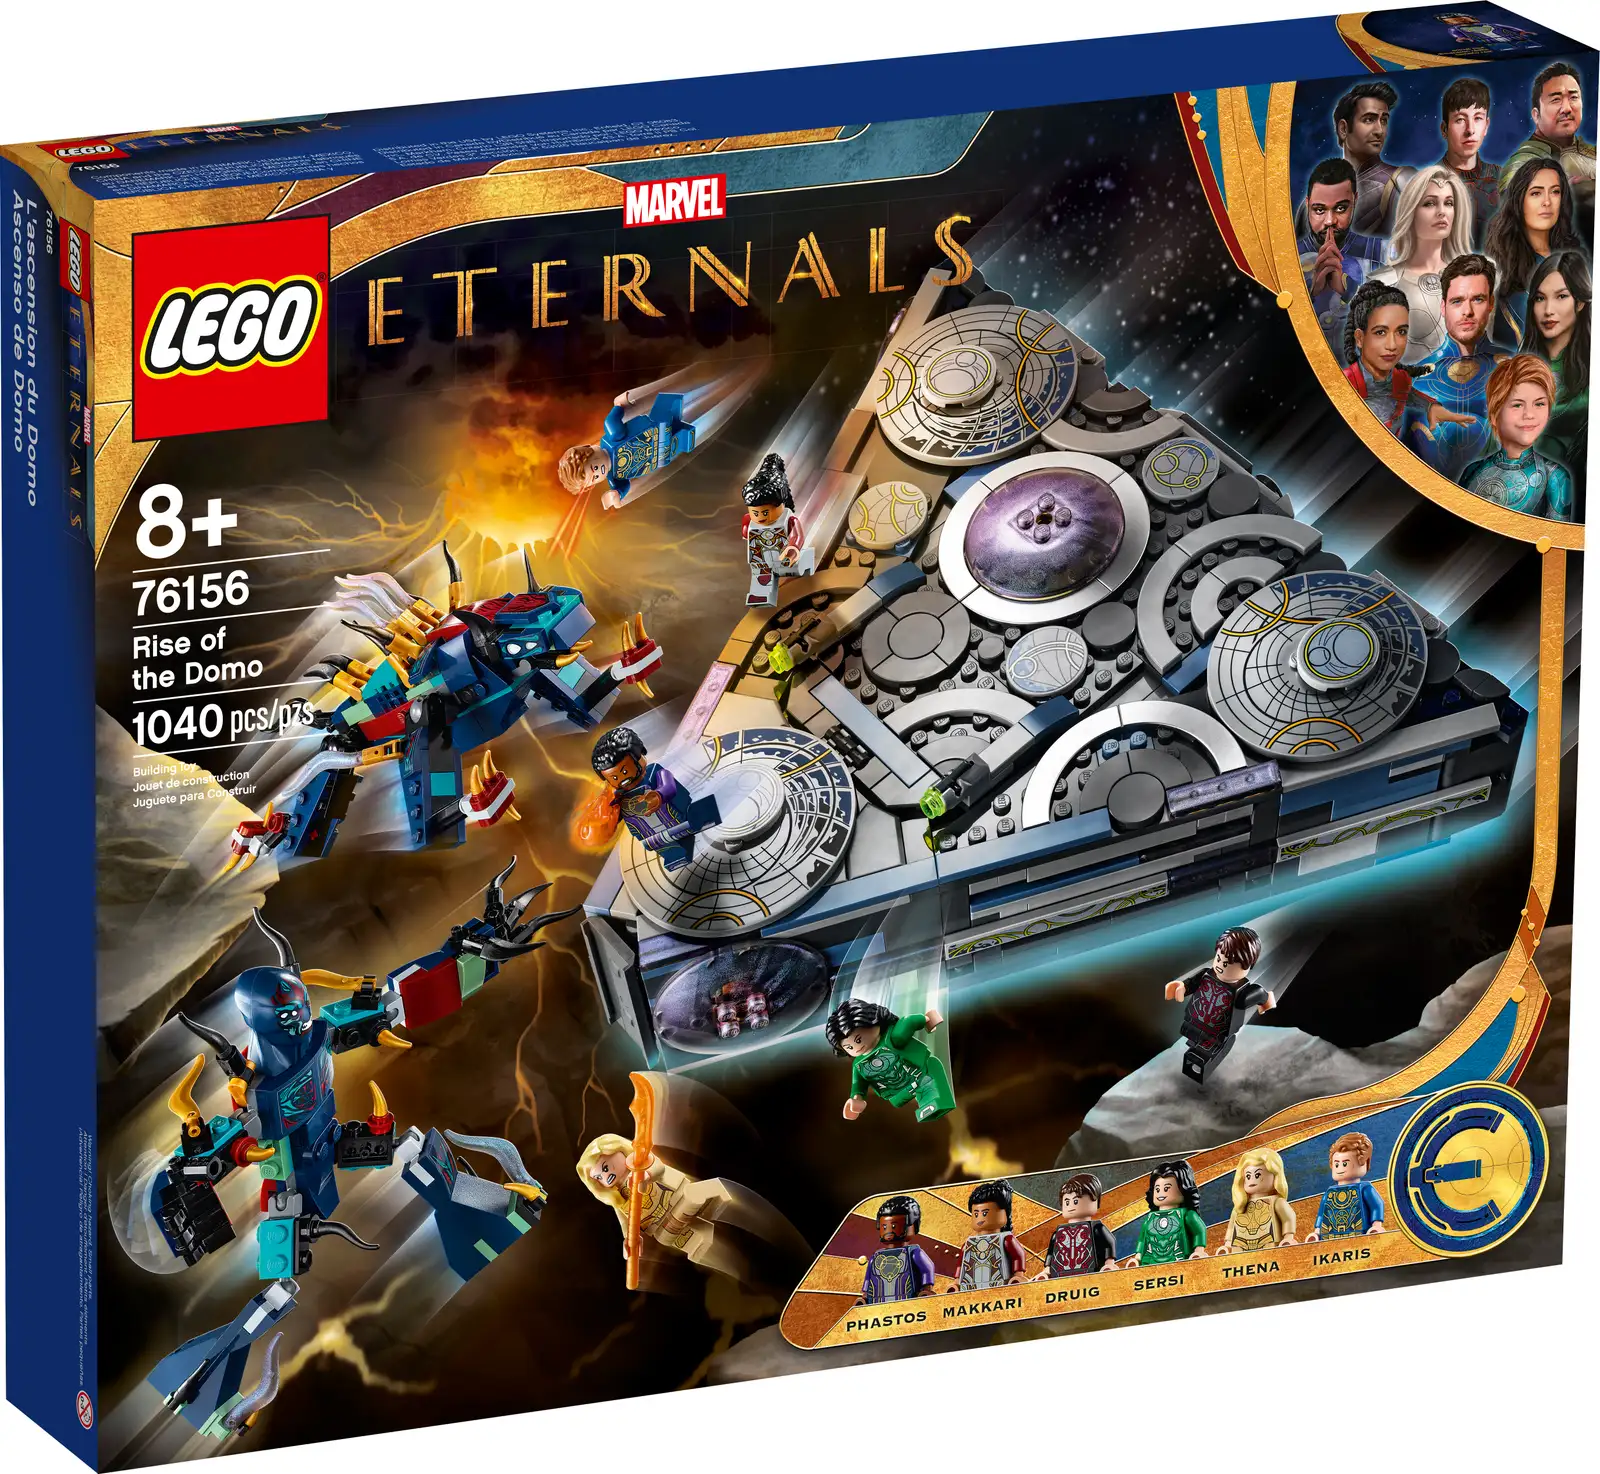 LEGO® Marvel Rise of the Domo (76156) lets kids explore the detailed interior of the Eternals’ spaceship then recreate the final battle with 6 superhero minifigures and 2 evil Deviants. Spaceship building toy and superhero battles If you’re looking for a new toy for a youngster, they’ll love this warship battle playset. Kids join 6 Eternals – Makkari, Ikaris, Thena, Sersi, Druig and Phastos – and explore their amazing spaceship. The 3 sides lift open to give access to the cockpit, weapons room, laboratory and more. But when the evil leader of the Deviants arrives with his accomplice, kids must use the spaceship to overcome the Deviants! If you’re buying for a minifigure fan, this is the only LEGO playset to feature the Druig and Phastos minifigures! Marvel Studios’ The Eternals playsets – Top superhero toys LEGO Marvel The Eternals brick building toys are action playsets with cool minifigures that inspire young imaginations and make ideal Christmas and birthday gifts. The LEGO® Marvel Rise of the Domo (76156) building toy takes kids inside the Eternals’ spaceship then lets them role-play endless battles with superhero minifigures and Deviant creatures. Includes 6 minifigures – Makkari, Ikaris, Thena, Sersi and the exclusive Druig and Phastos – 2 Deviant action figures, including Kro, the Deviant leader, a spaceship, weapons and accessories. Kids use their superhero skills in the final battle between the Eternals and the Deviants. The Eternals’ spaceship, with its detailed interior, ensures the imaginative play will be out of this world! Looking for a superhero building toy for kids? This LEGO® Marvel The Eternals playset, with 6 cool minifigures and 2 Deviant action figures, makes a great Christmas or birthday gift for kids aged 8+. With The Eternals’ spaceship measuring over 8” (22cm) long, LEGO® Marvel Rise of the Domo gives kids imaginative superhero action on an epic scale – and looks amazing in any youngster’s bedroom. This easy-to-build toy comes with simple, clear instructions that ensure kids can build, play and enjoy maximum imaginative fun with their Eternals superhero playset without delay. LEGO® Marvel The Eternals toys put new superhero movie action and adventure into kids’ hands! With cool, collectible characters, the imaginative role-play adventures will never end. LEGO® building toys meet demanding industry standards, which means they are consistent, compatible and connect and pull apart perfectly every time – and it’s been that way since 1958. LEGO® bricks and pieces are dropped, heated, crushed, twisted and analyzed to make sure your child’s construction toy meets stringent safety and quality standards.